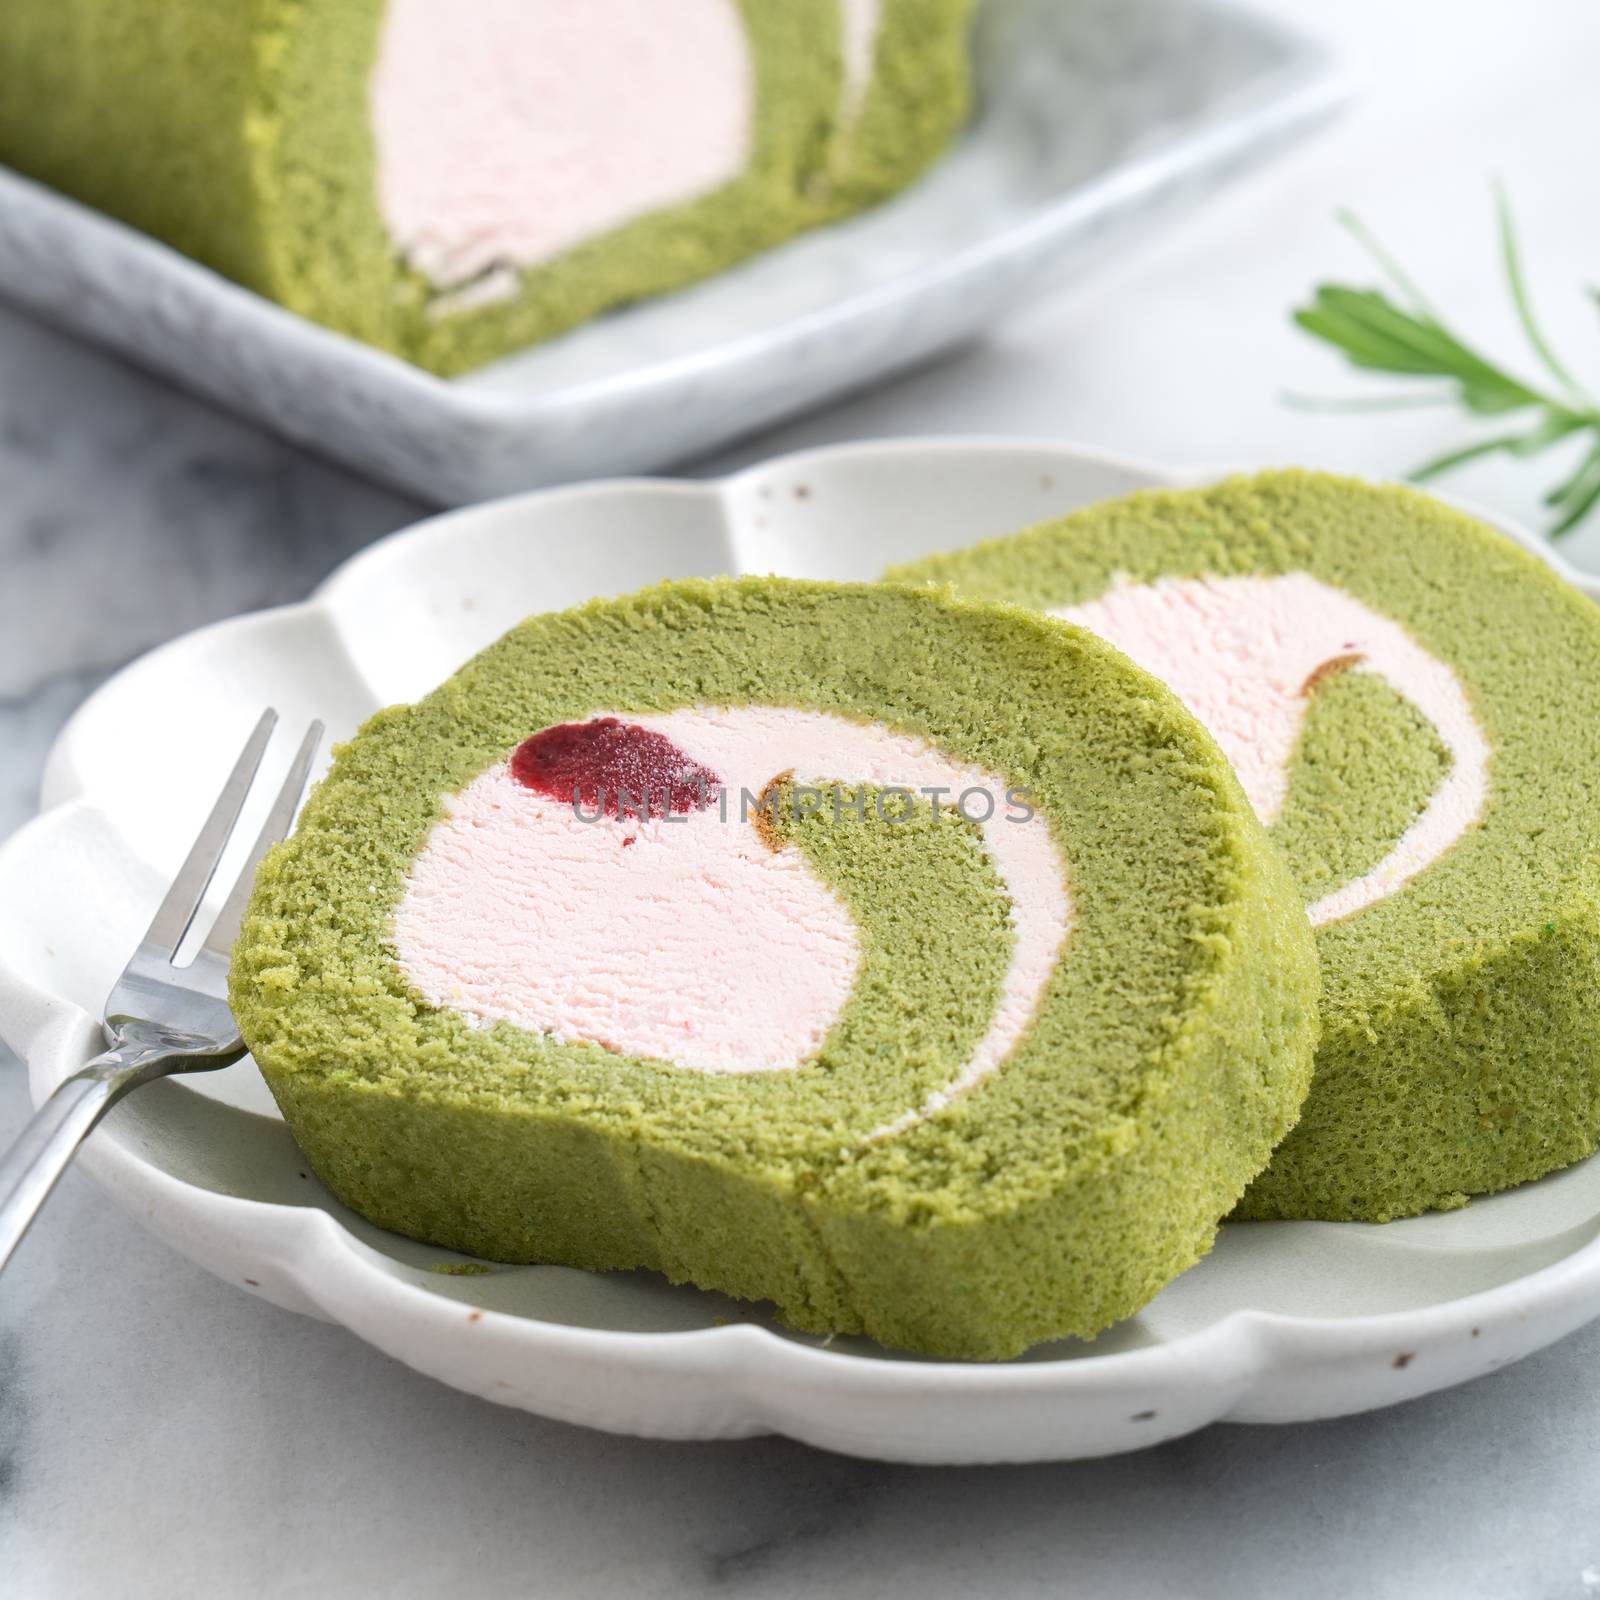 Delicious Matcha Swiss Roll Cake slices with strawberry icing cream on white background, close up.